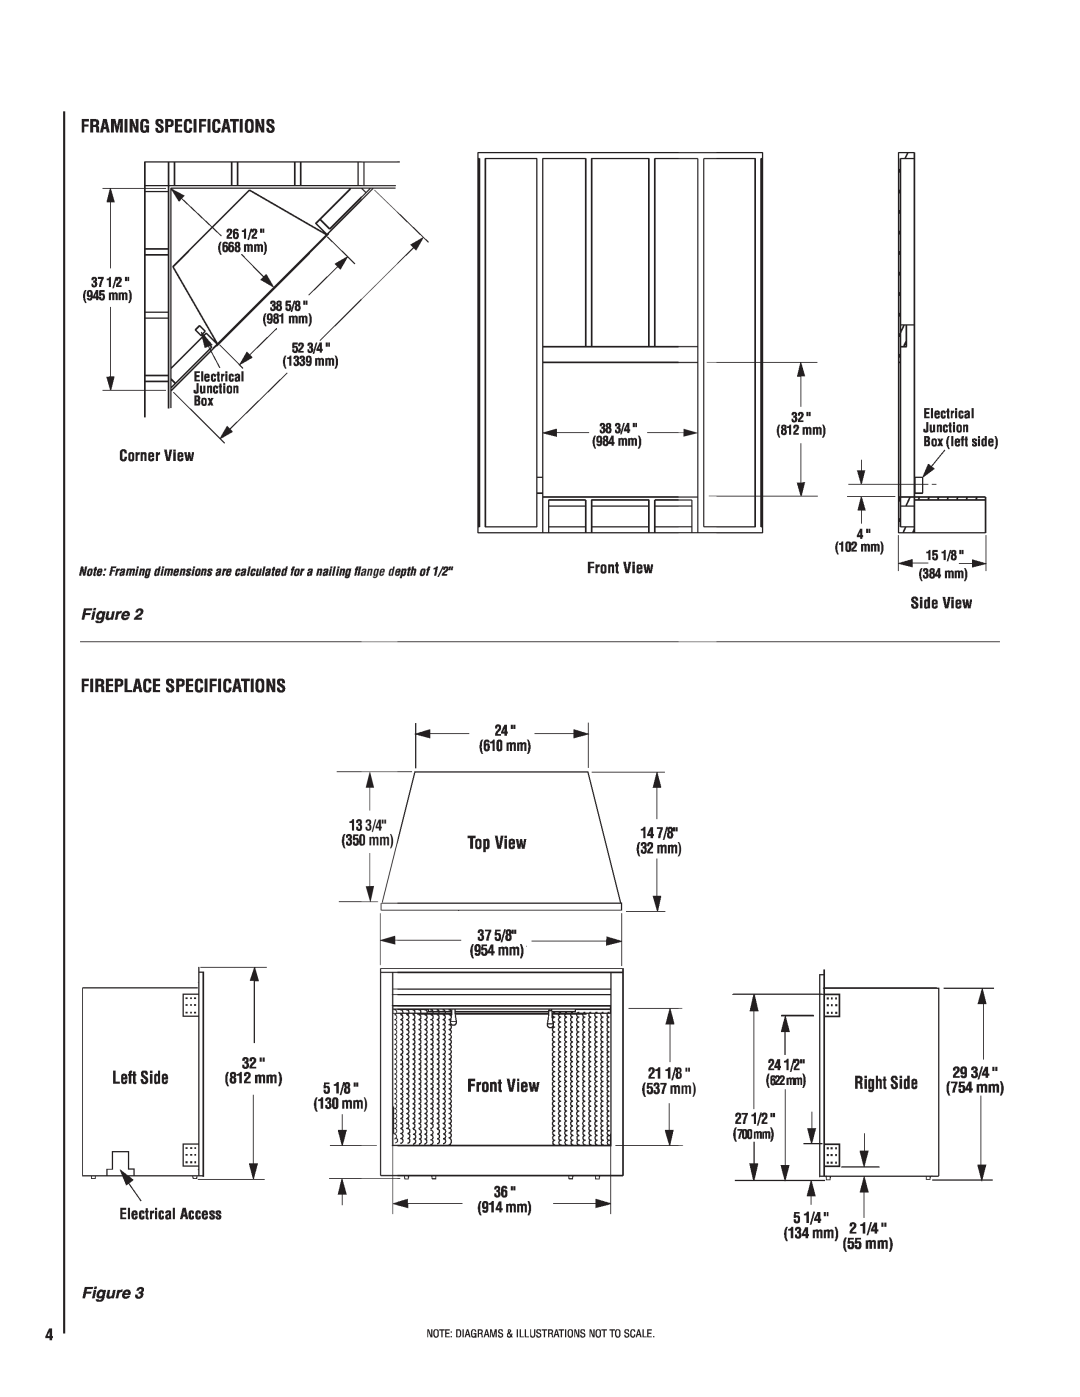 Lennox Hearth MPE-36R installation instructions Framing Specifications, Fireplace Specifications, Left Side 